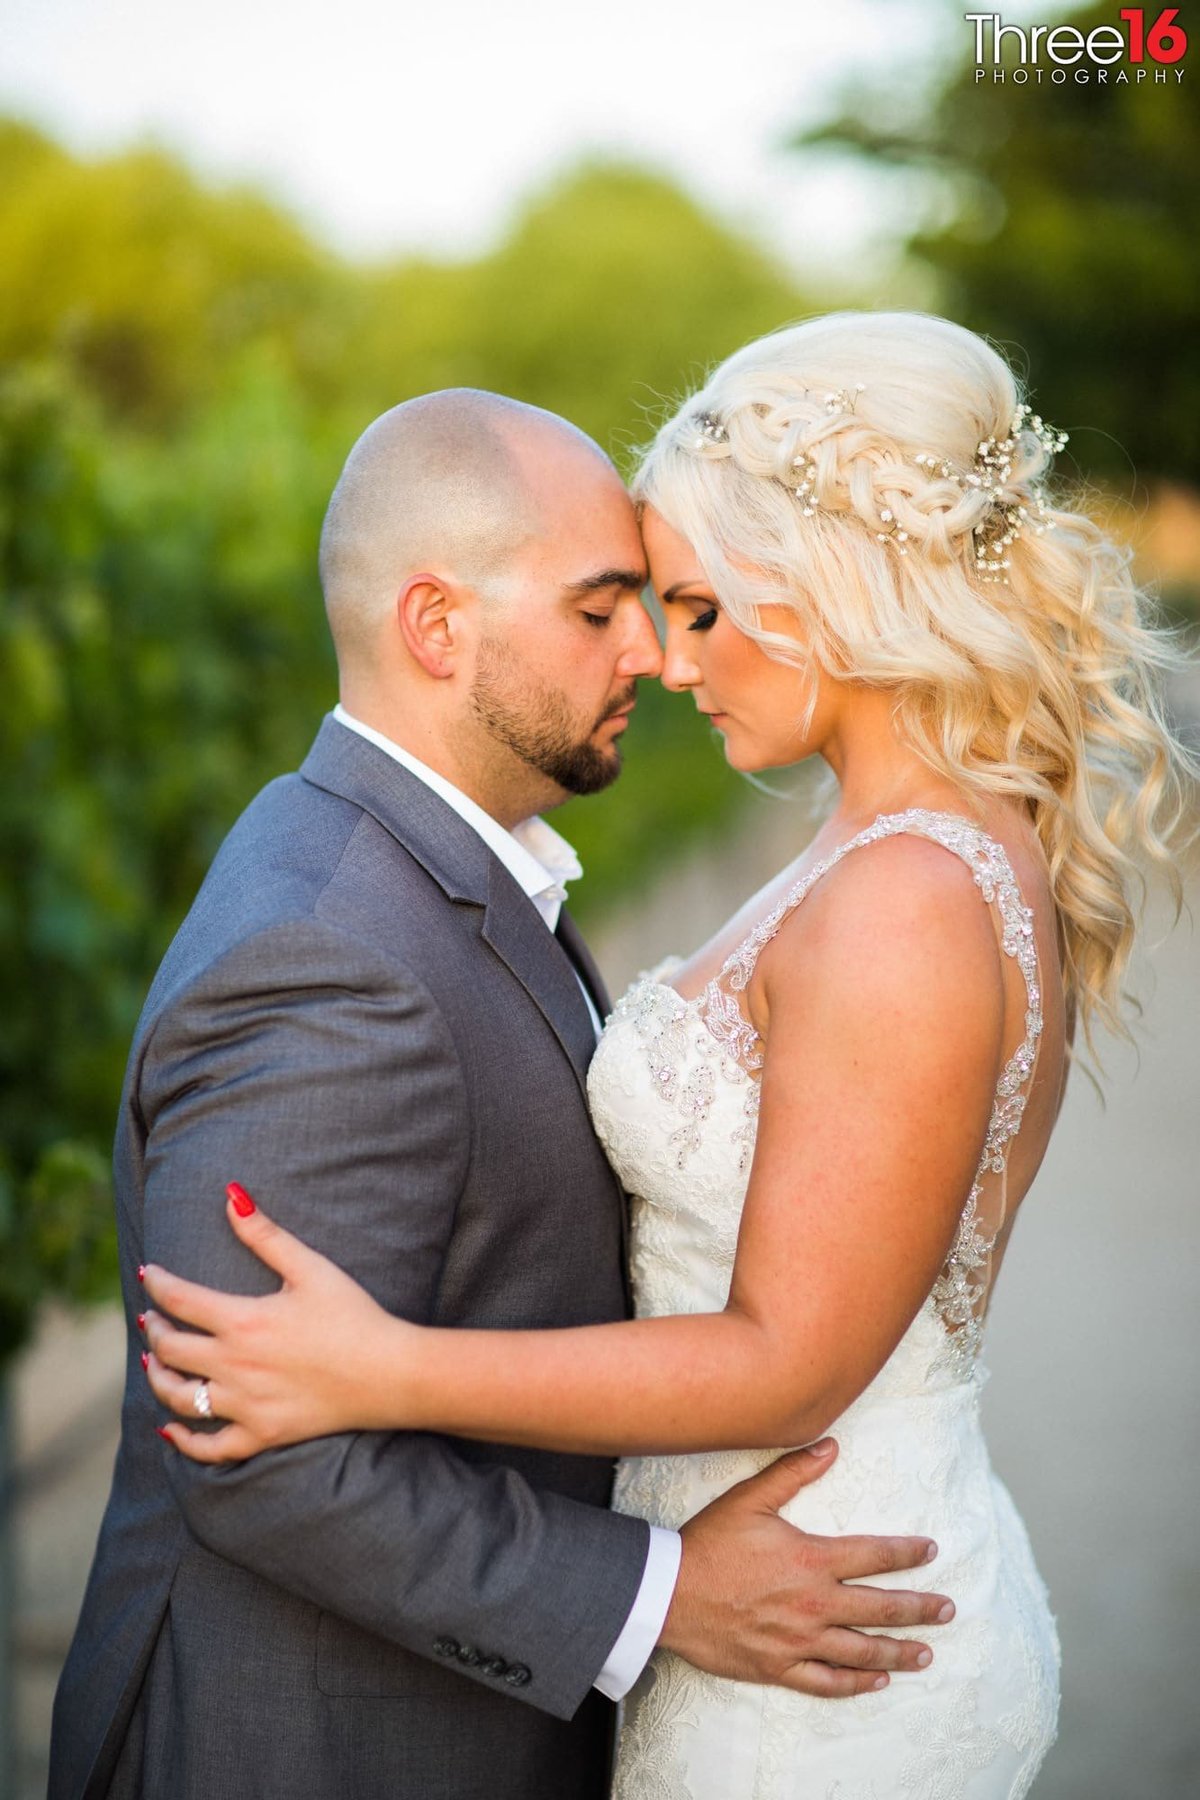 Bride and Groom hold each other during a tender moment in prayer